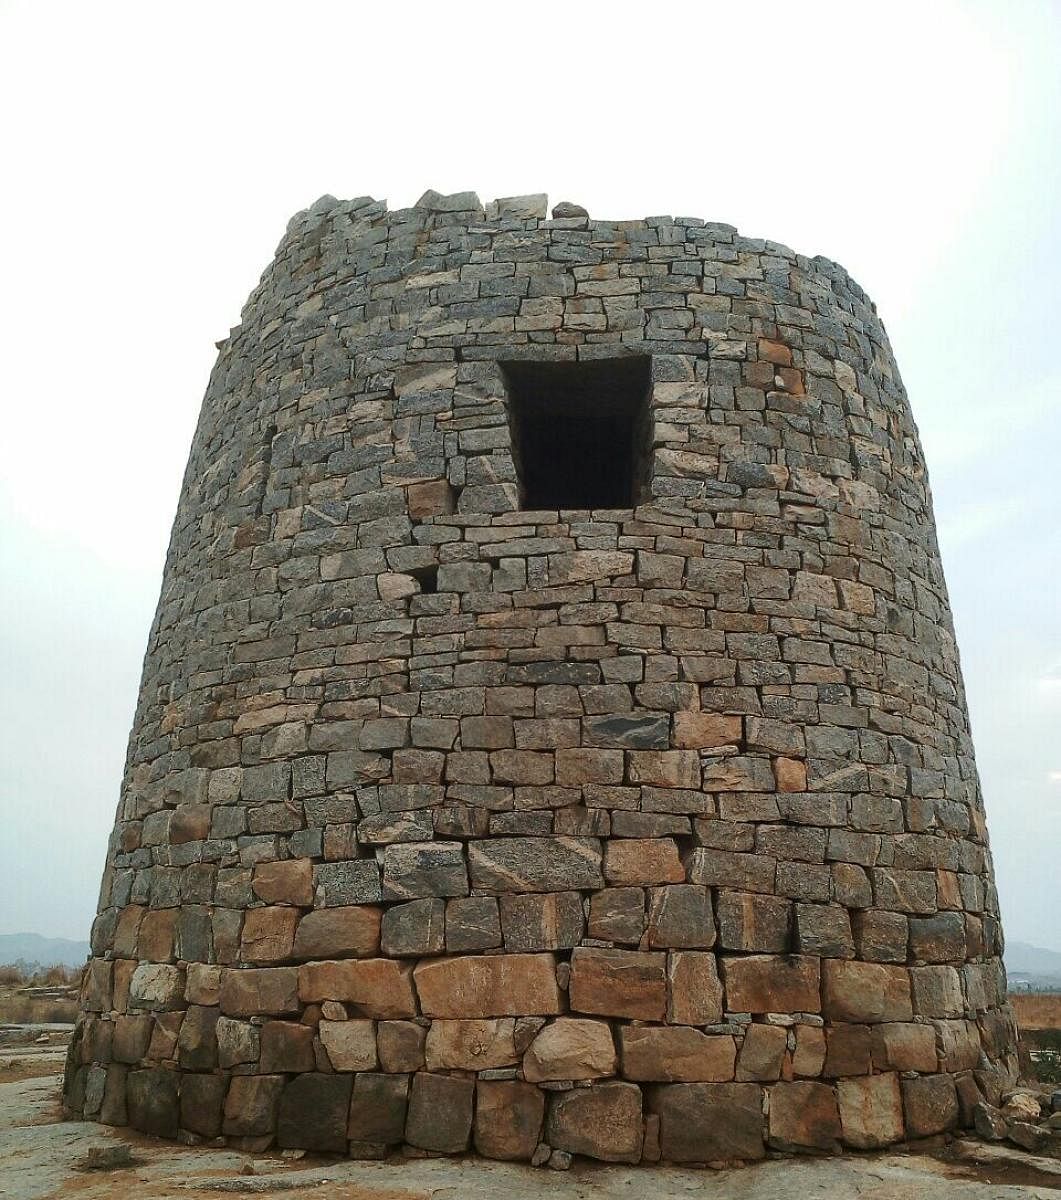 The pillar was used as a look-out by Narasimha Nayaka's army to keep track of enemy movements in the area. Narasimha Nayaka served King Gumma Nayaka.